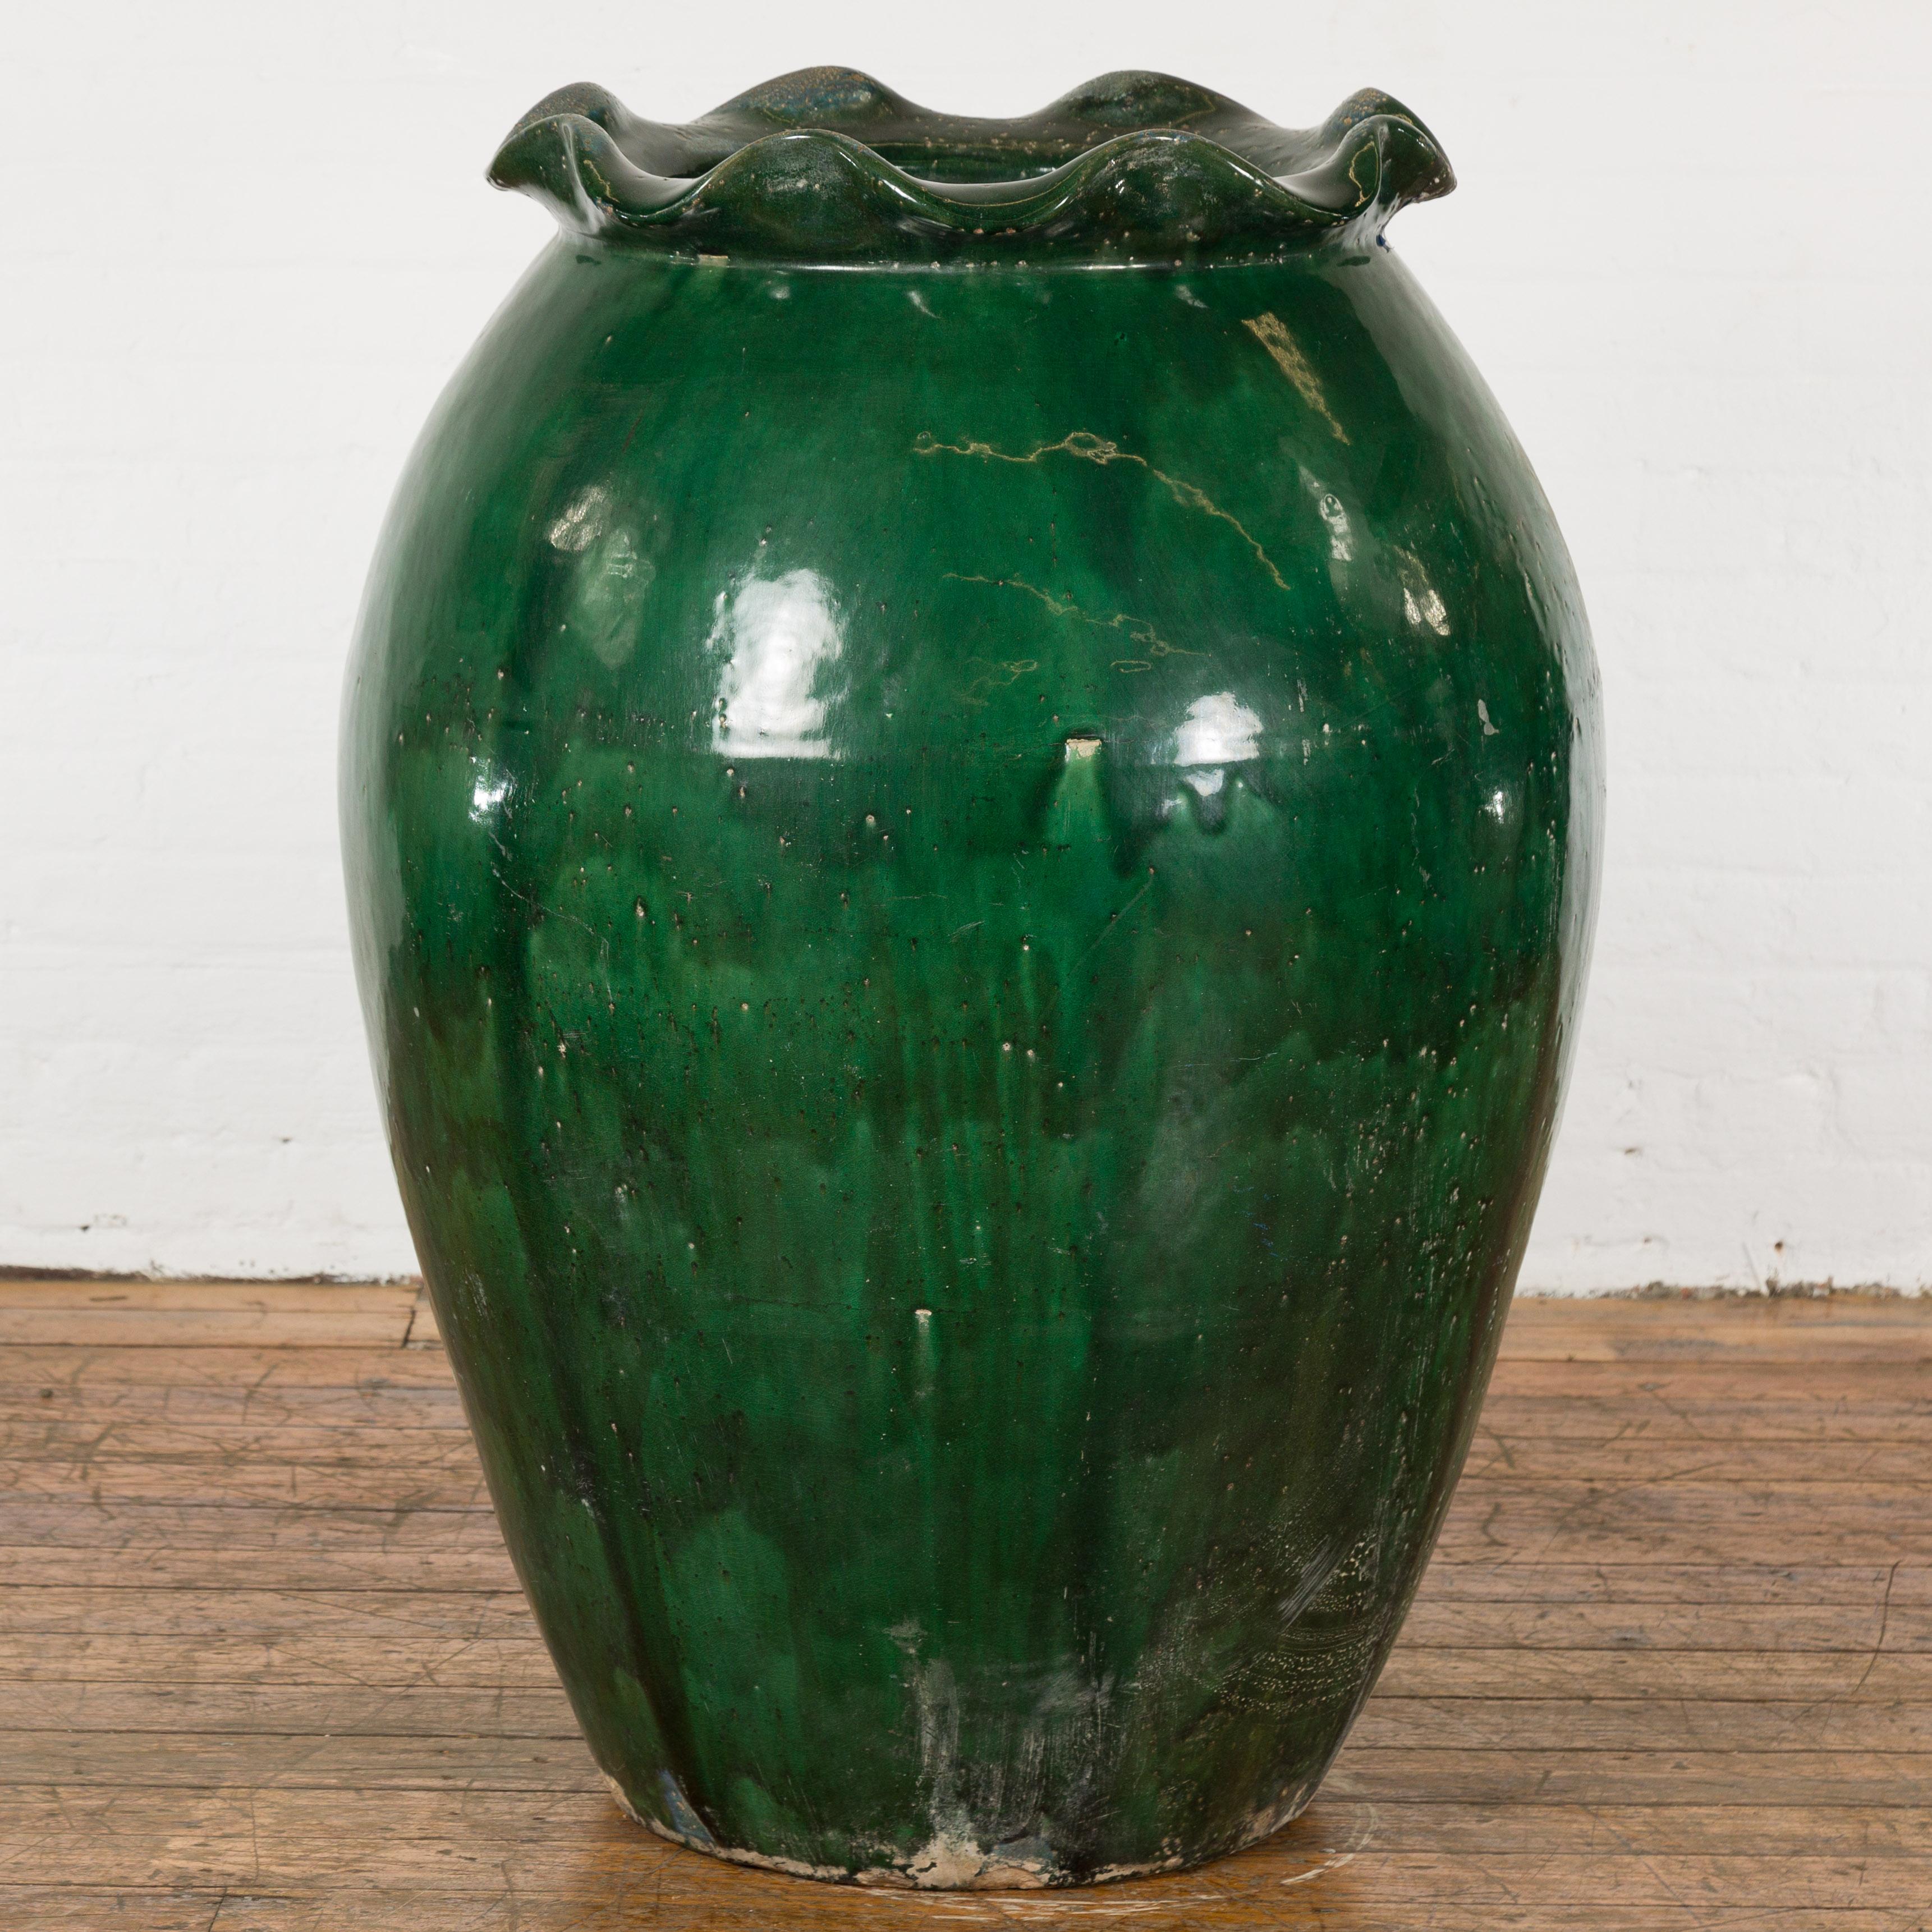 A large antique Thai ceramic planter from the 19th century, with green glazed finish, scalloped lip and weathered patina. Created in Thailand during the 19th century, this planter attracts the attention with its oversized silhouette and distressed